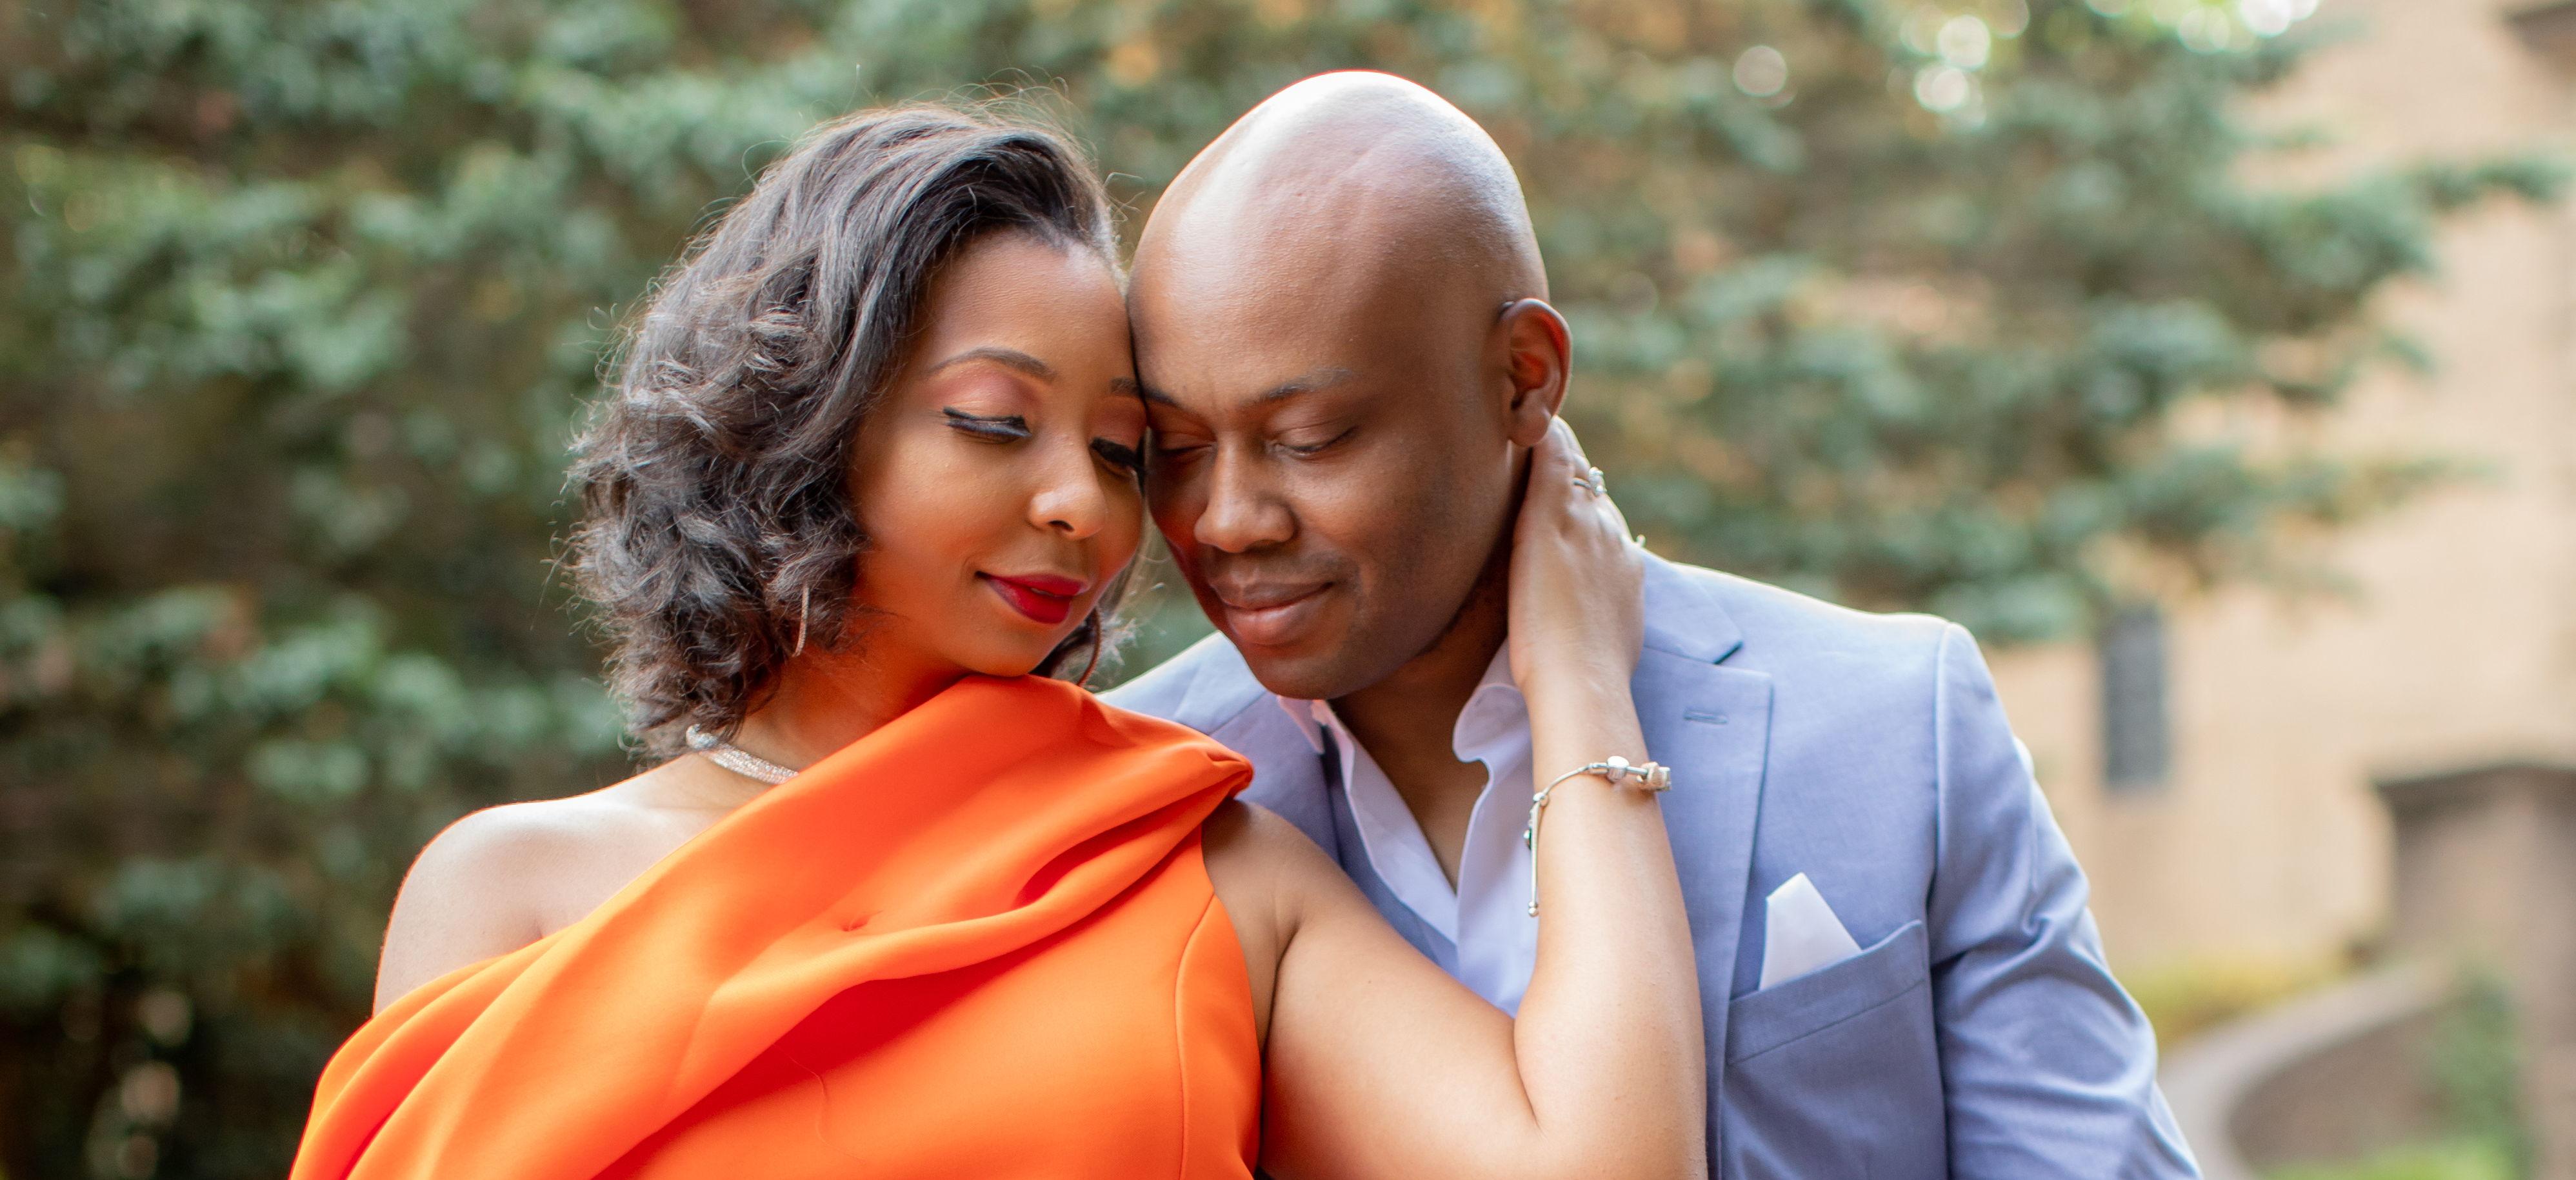 The Wedding Website of Amecia Starks and Irvin Edwards II